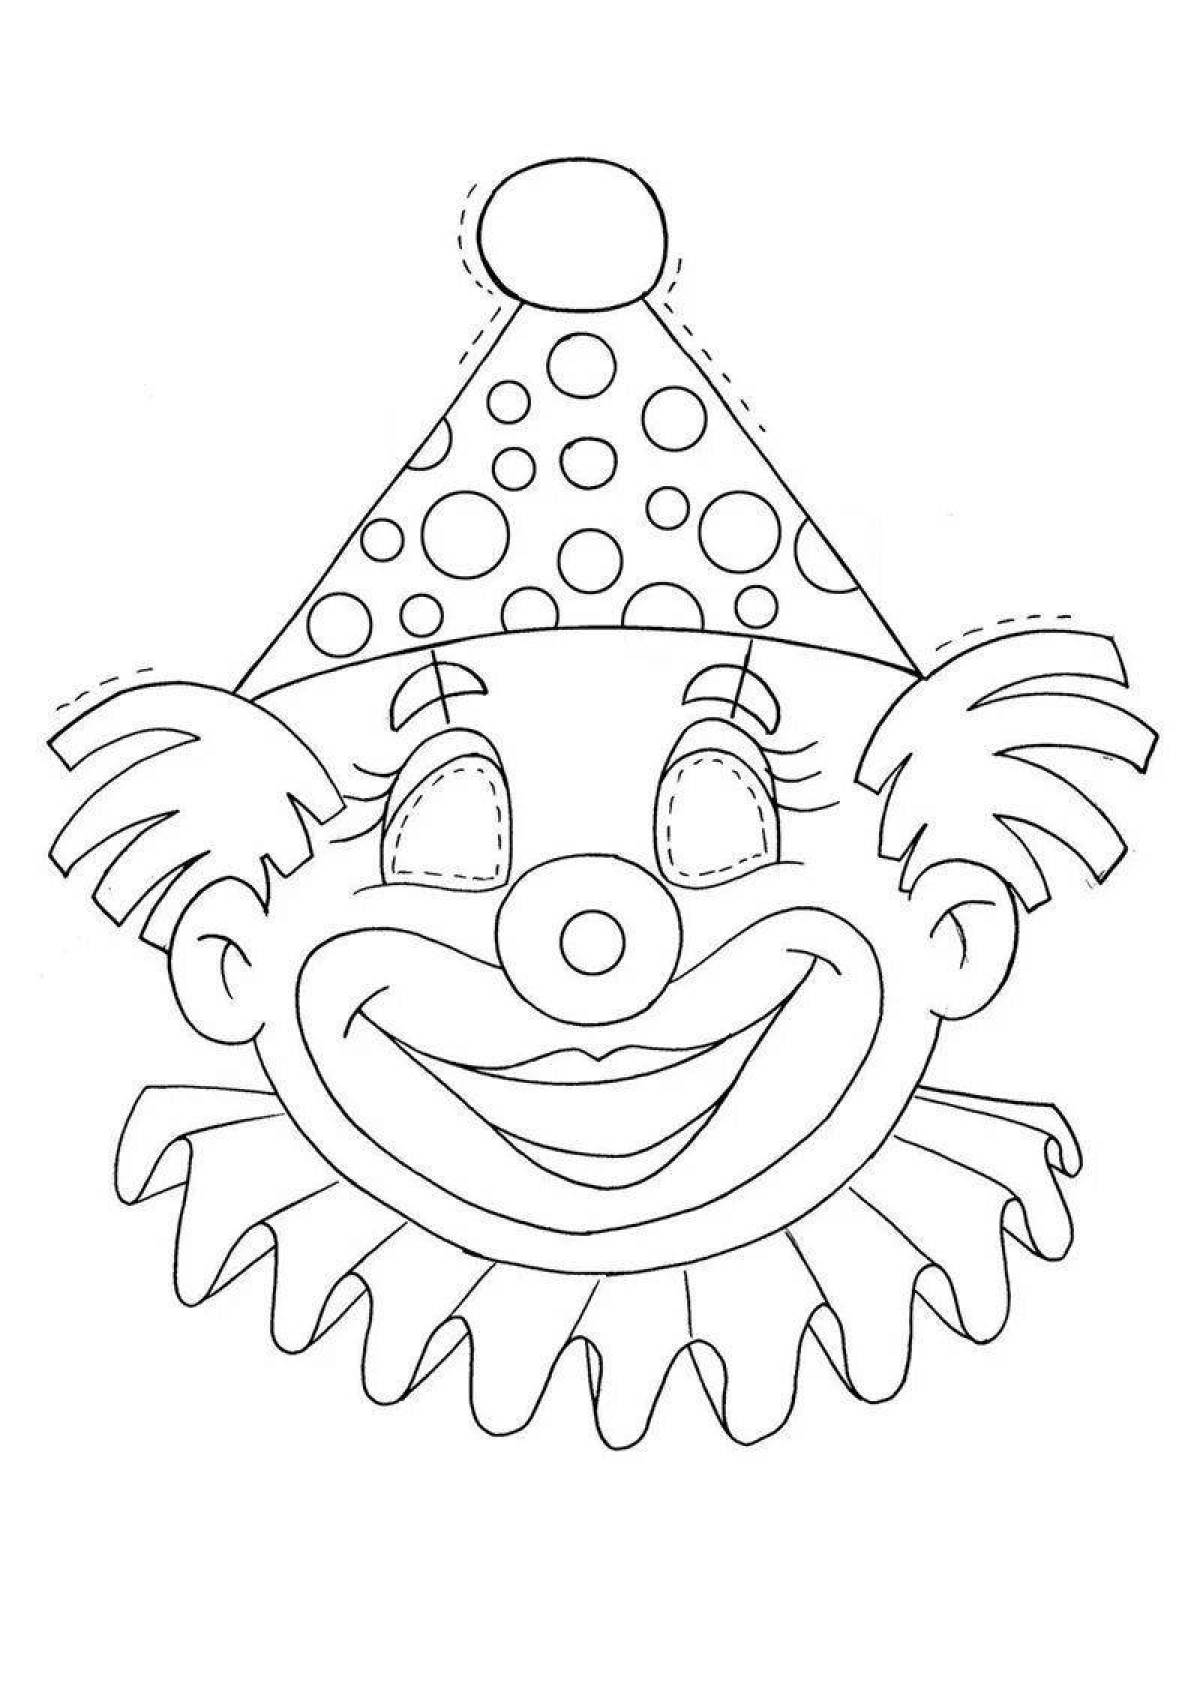 Animated clown mask coloring page